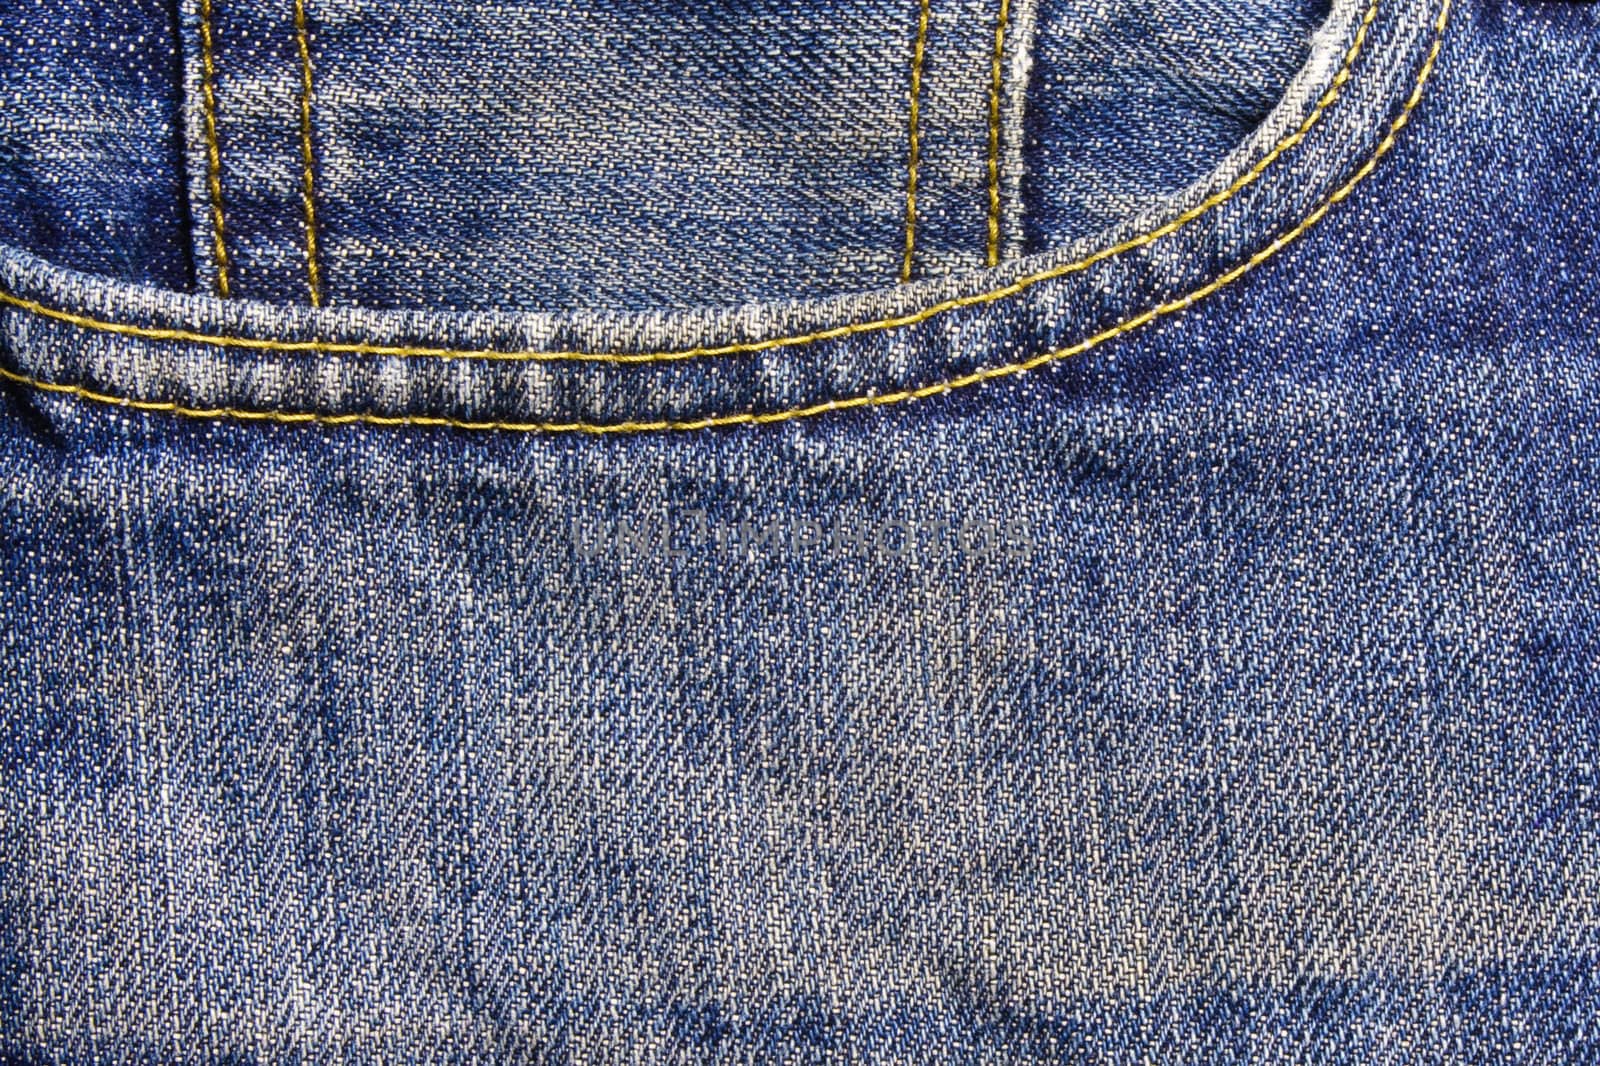 Jeans texture in different part